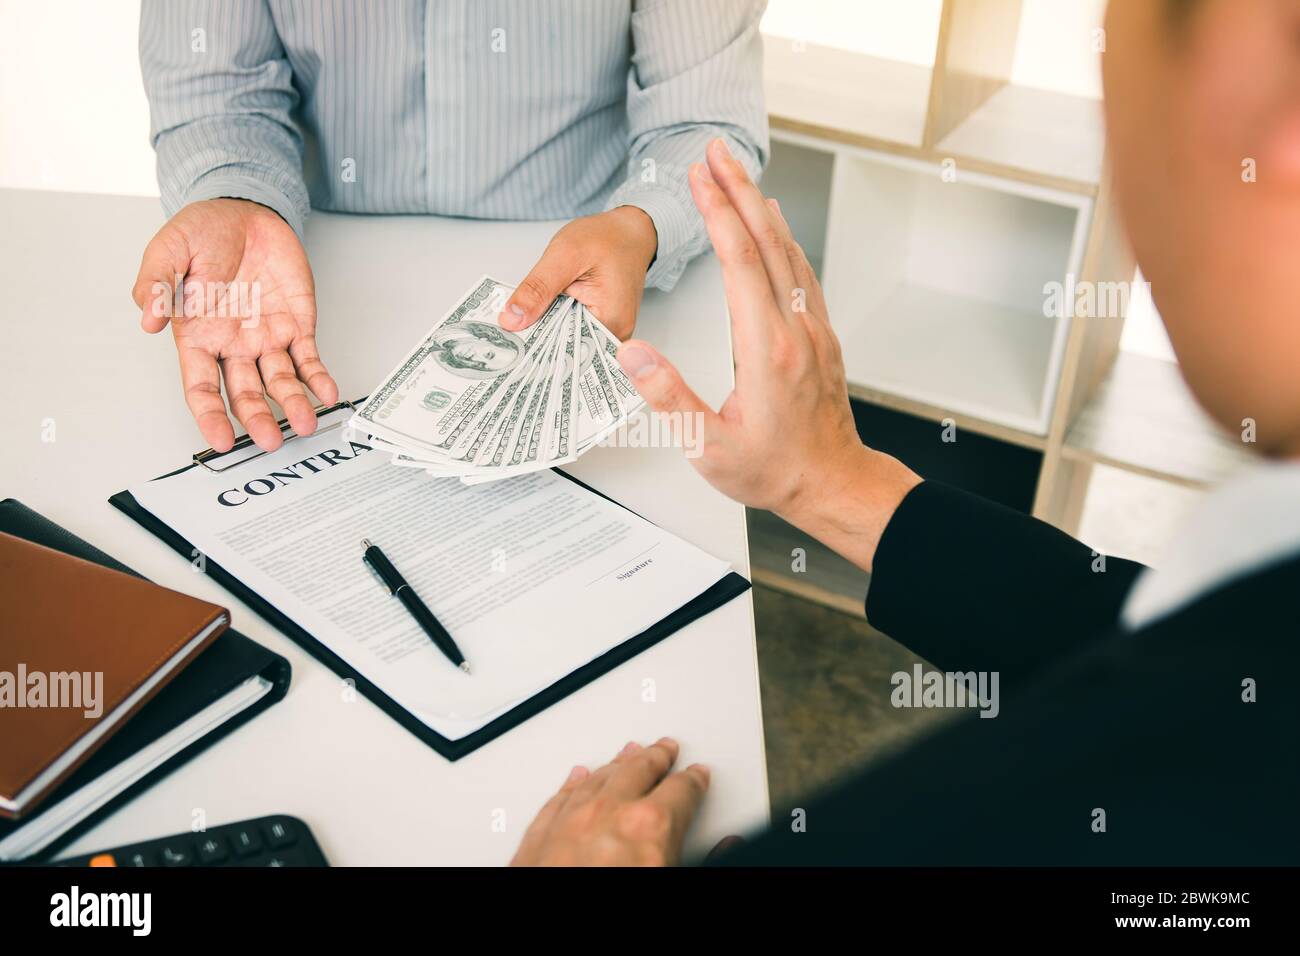 Business person refusing bribe given money by partner with anti bribery corruption concept. Stock Photo